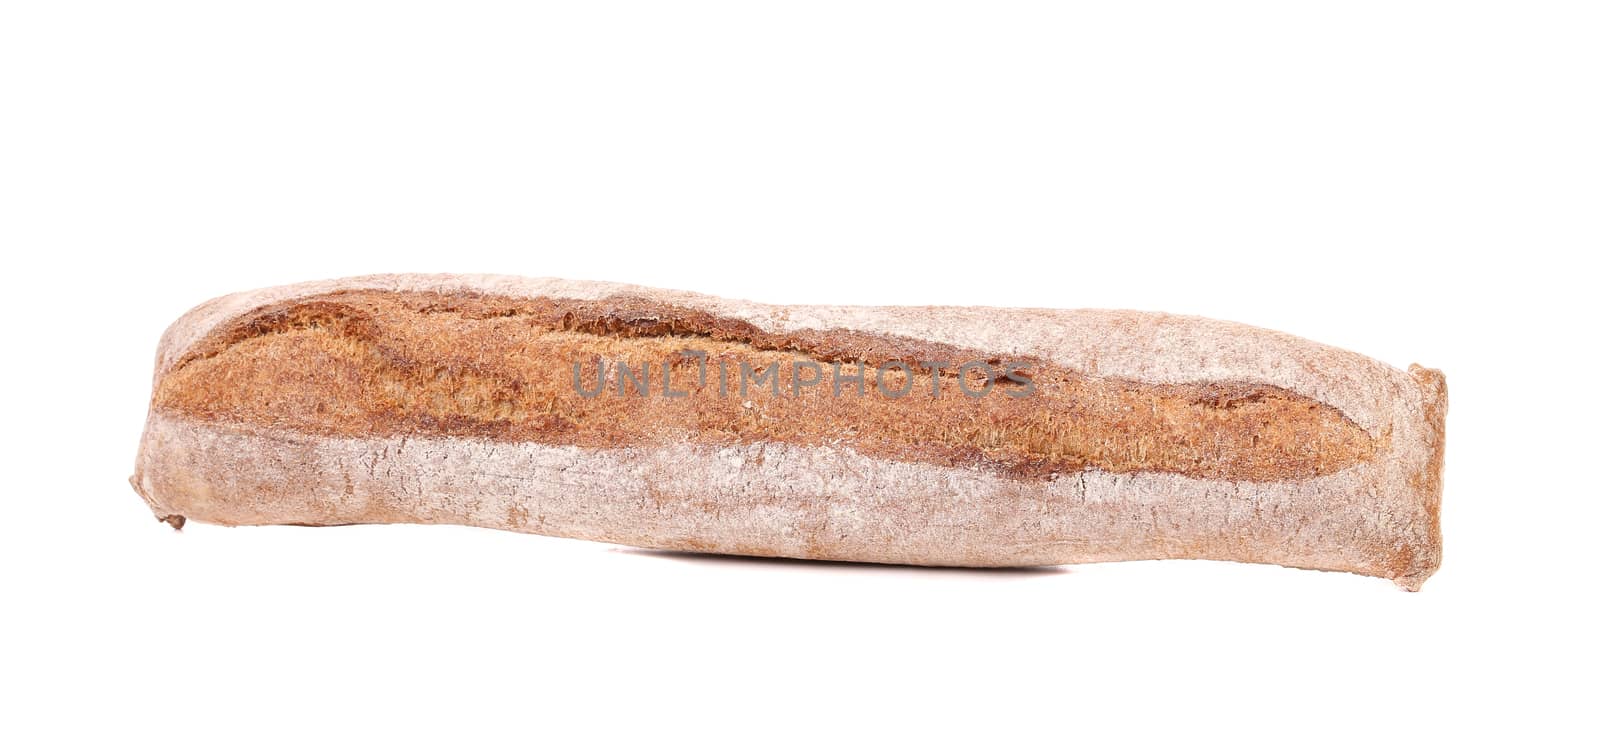 Crackling white bread. Isolated on a white background